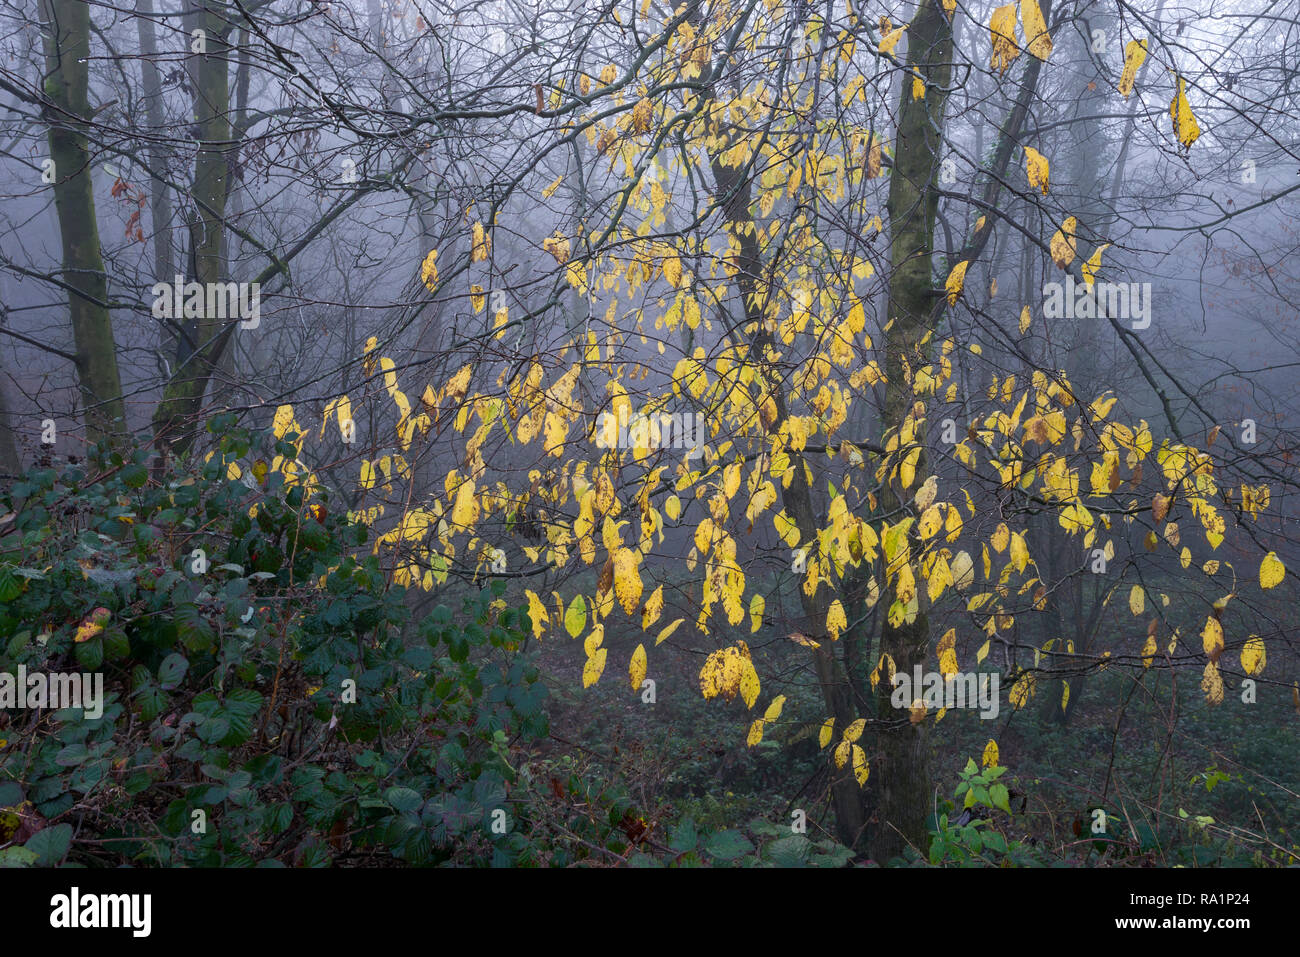 Yellow leaves hanging onto tree in foggy winter woodland. Stock Photo